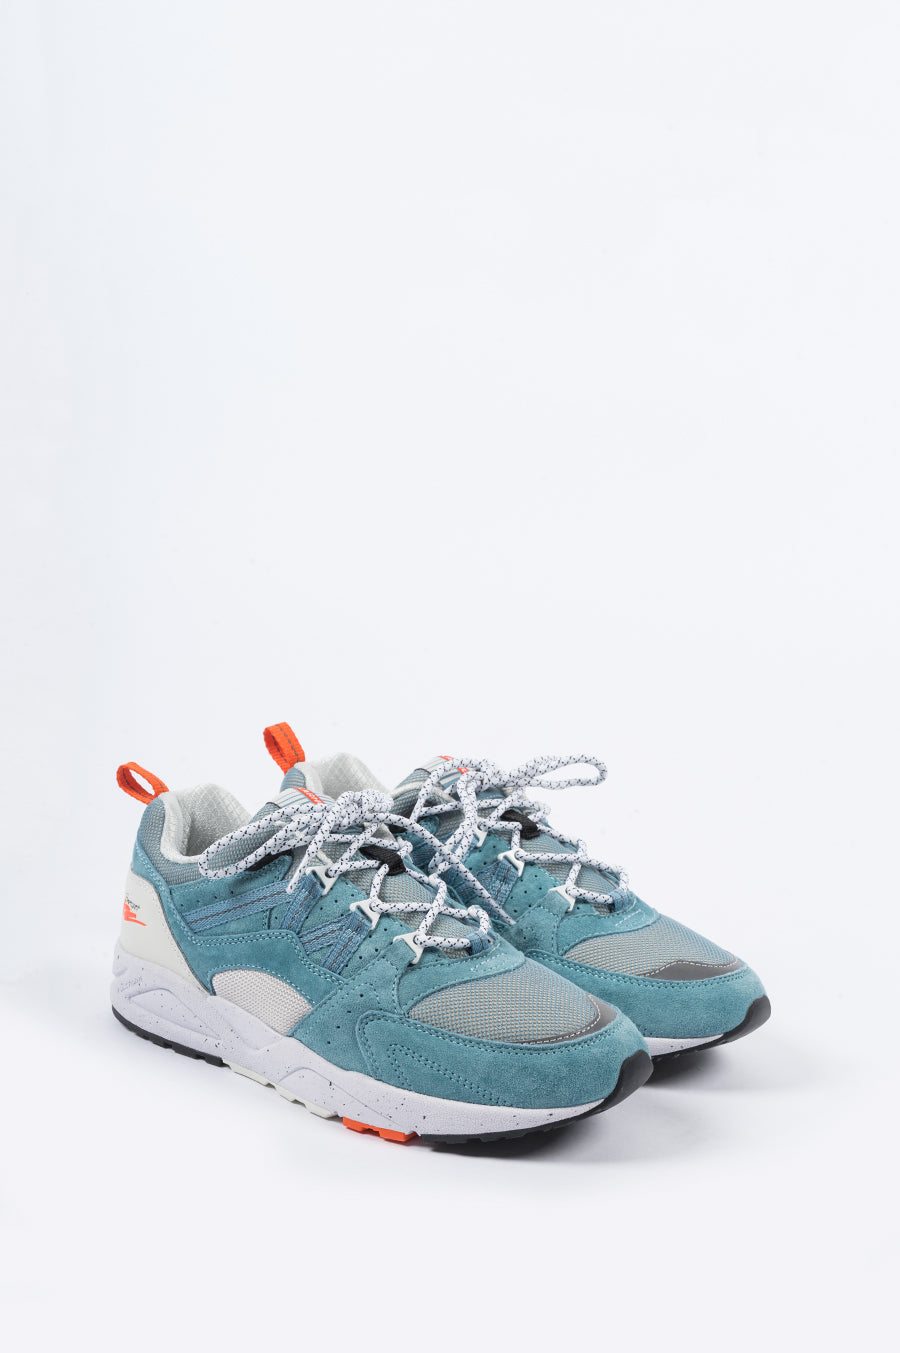 KARHU FUSION 2.0 CAMEO BLUE LILY WHITE - BLENDS